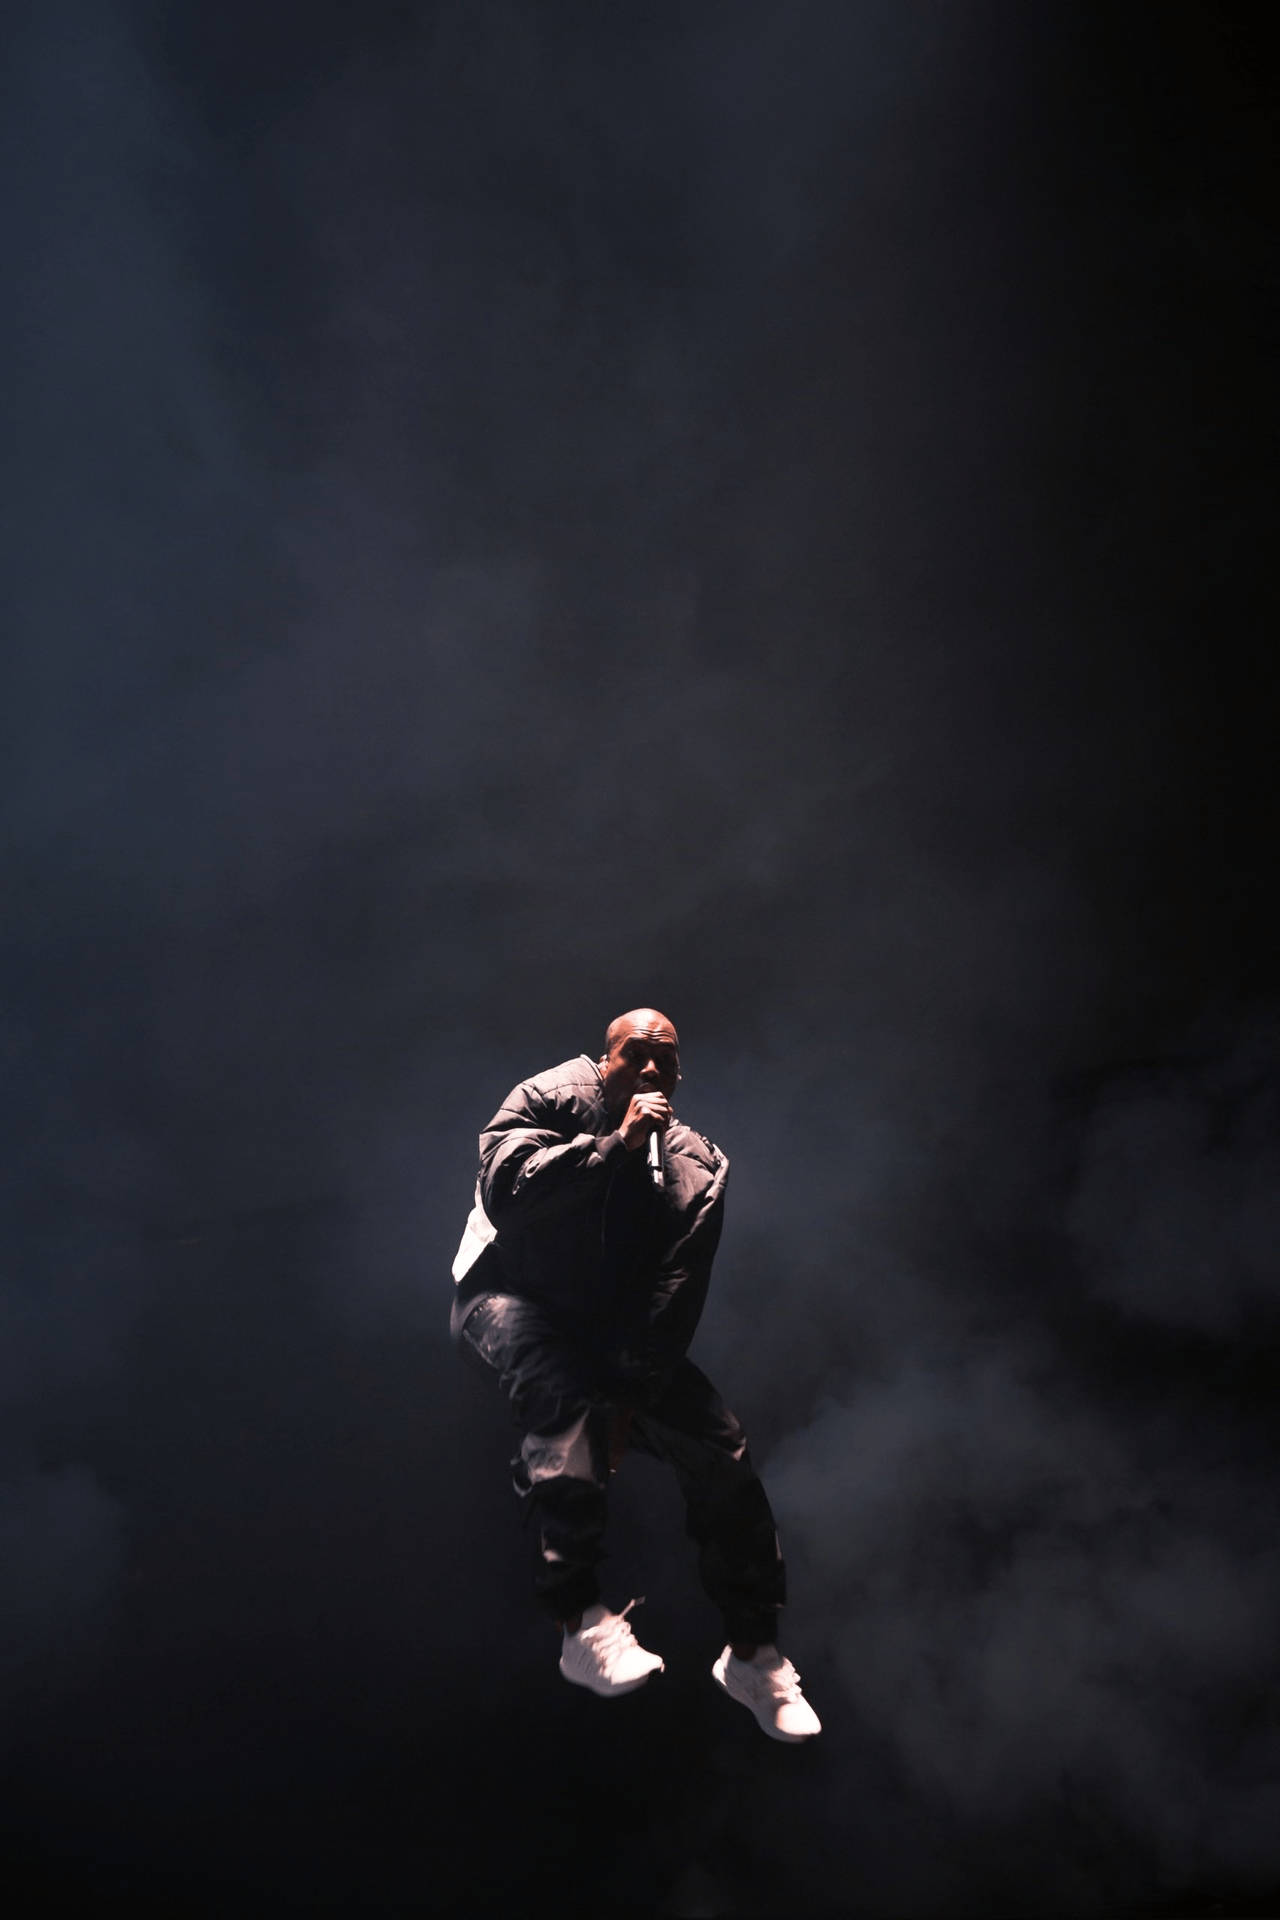 Kanye West Jumping On Stage Background